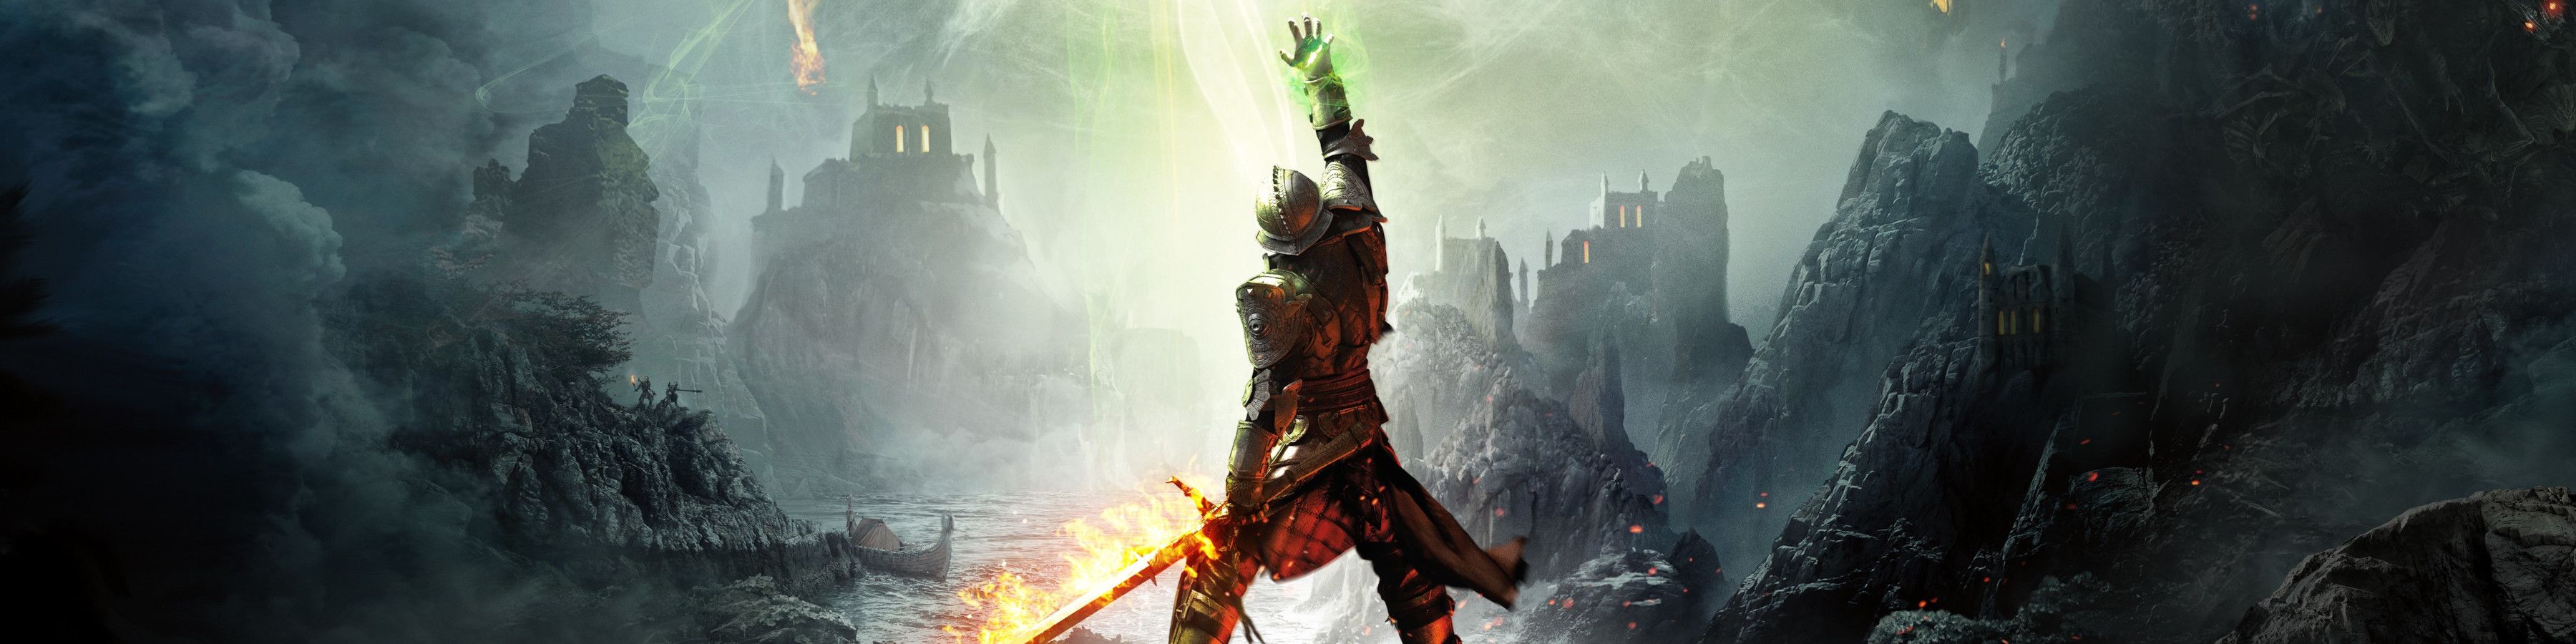 Dragon Age: Inquisition key artwork of Inquisitor raising their hand upwards to the rift with their sword drawn.